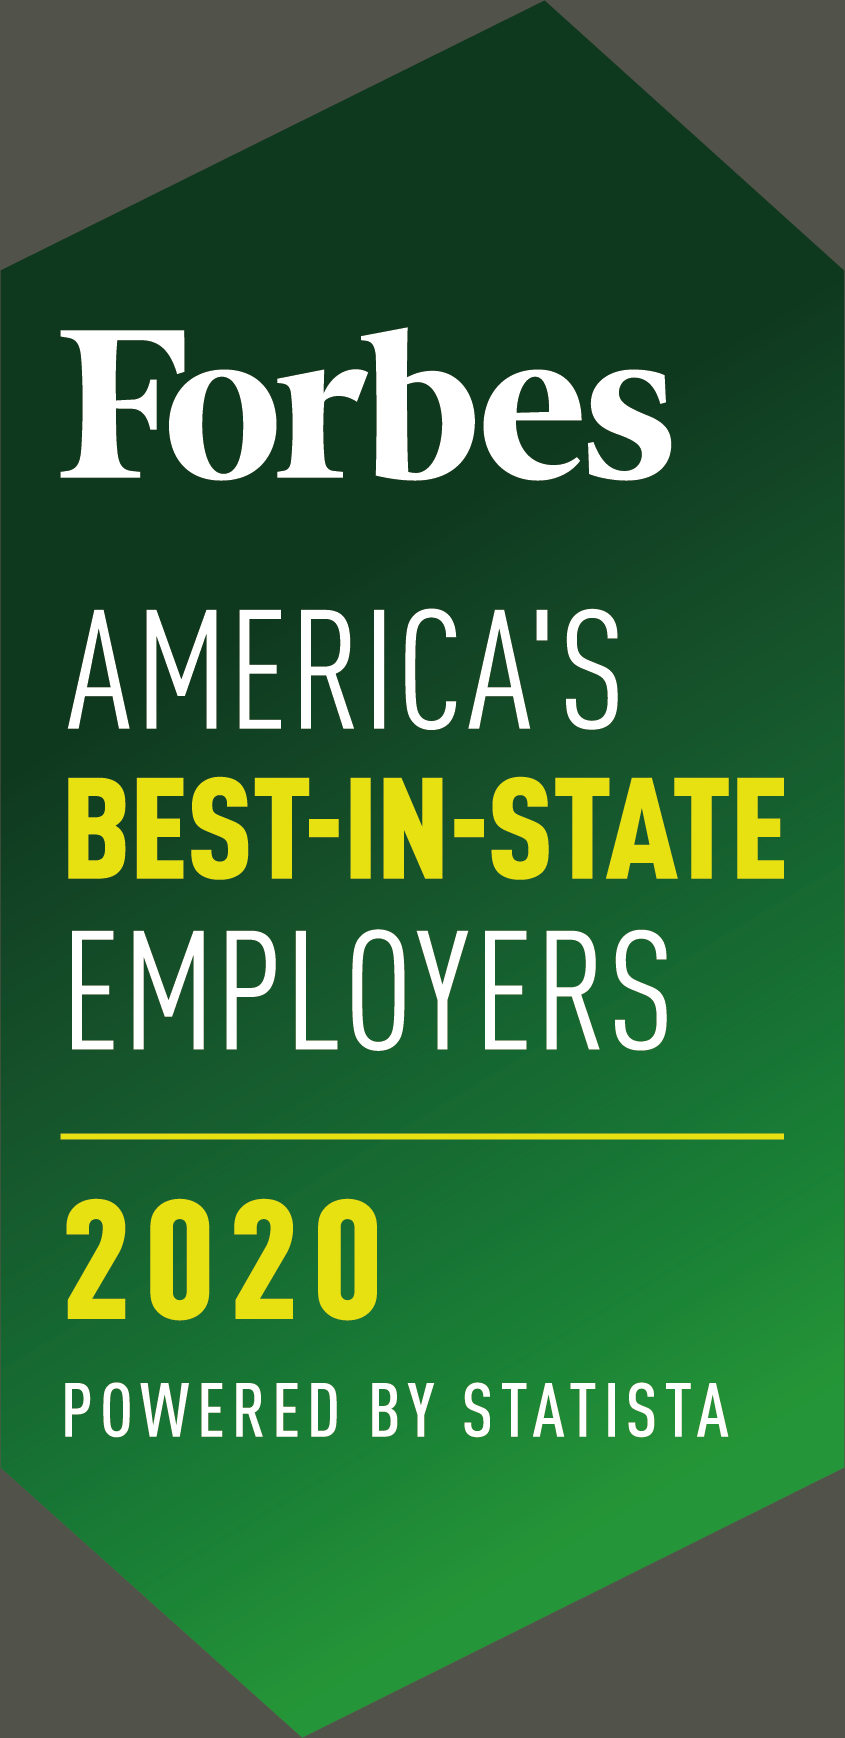 Forbes - Best in state employer - 2020